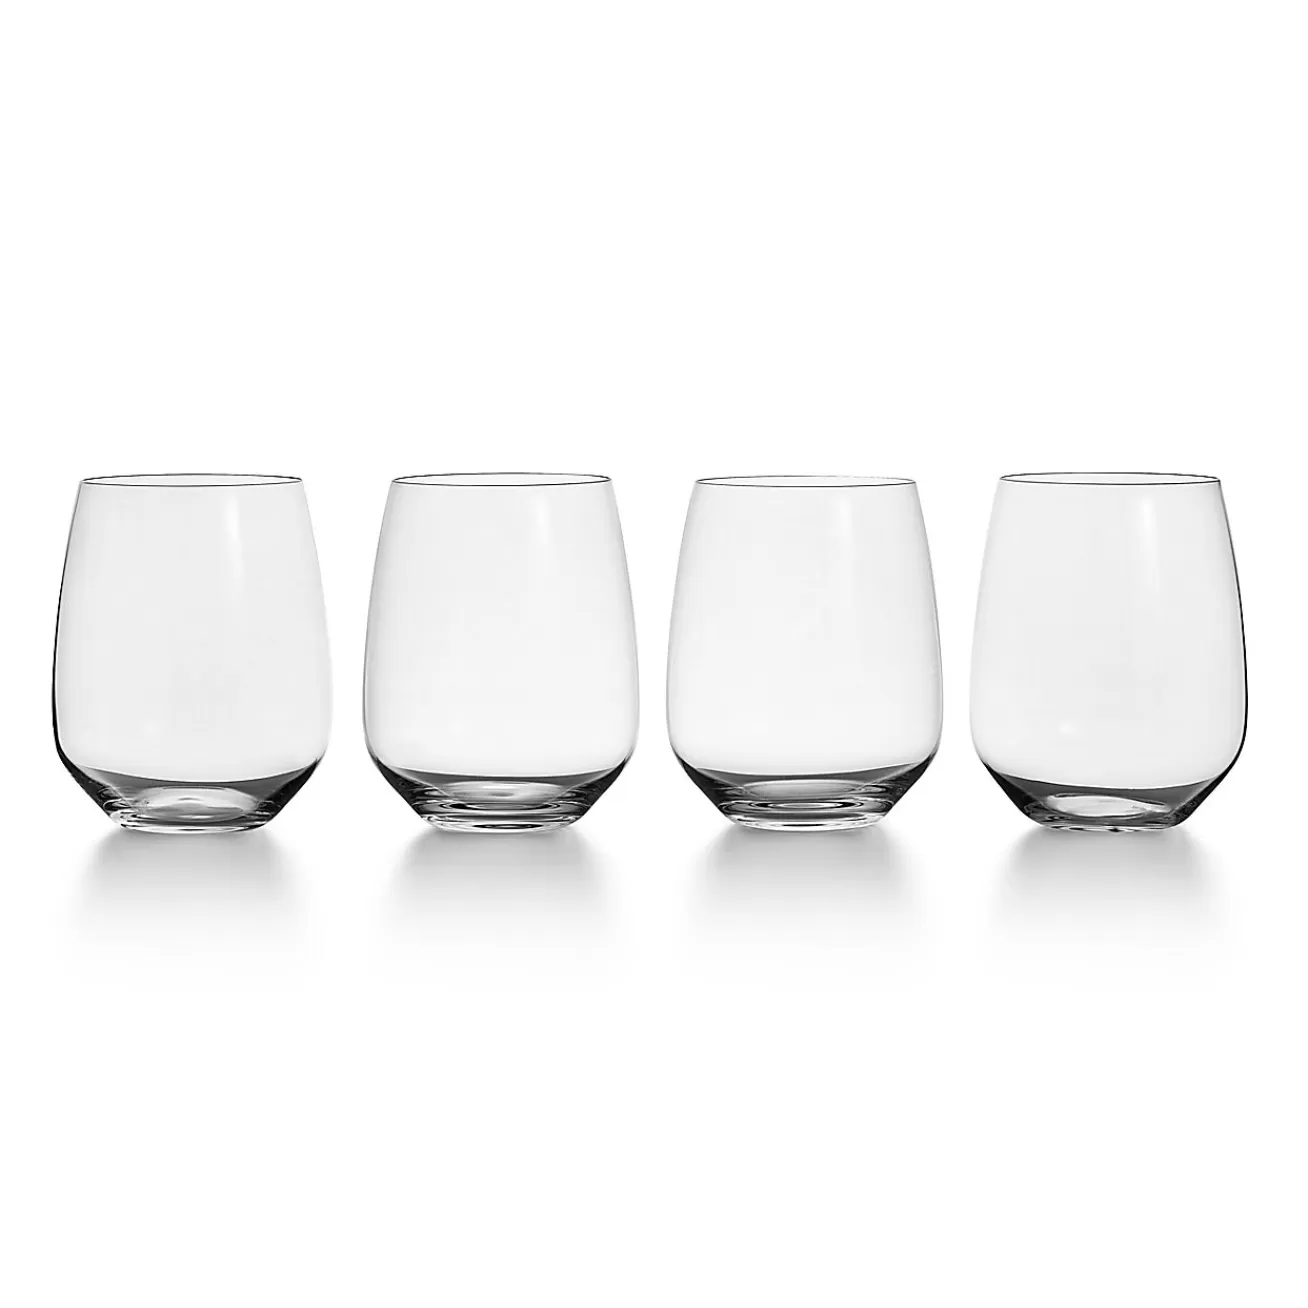 Tiffany & Co. Tiffany Connoisseur Water Glass in Crystal Glass, Set of Four | ^ The Couple | Glassware & Barware